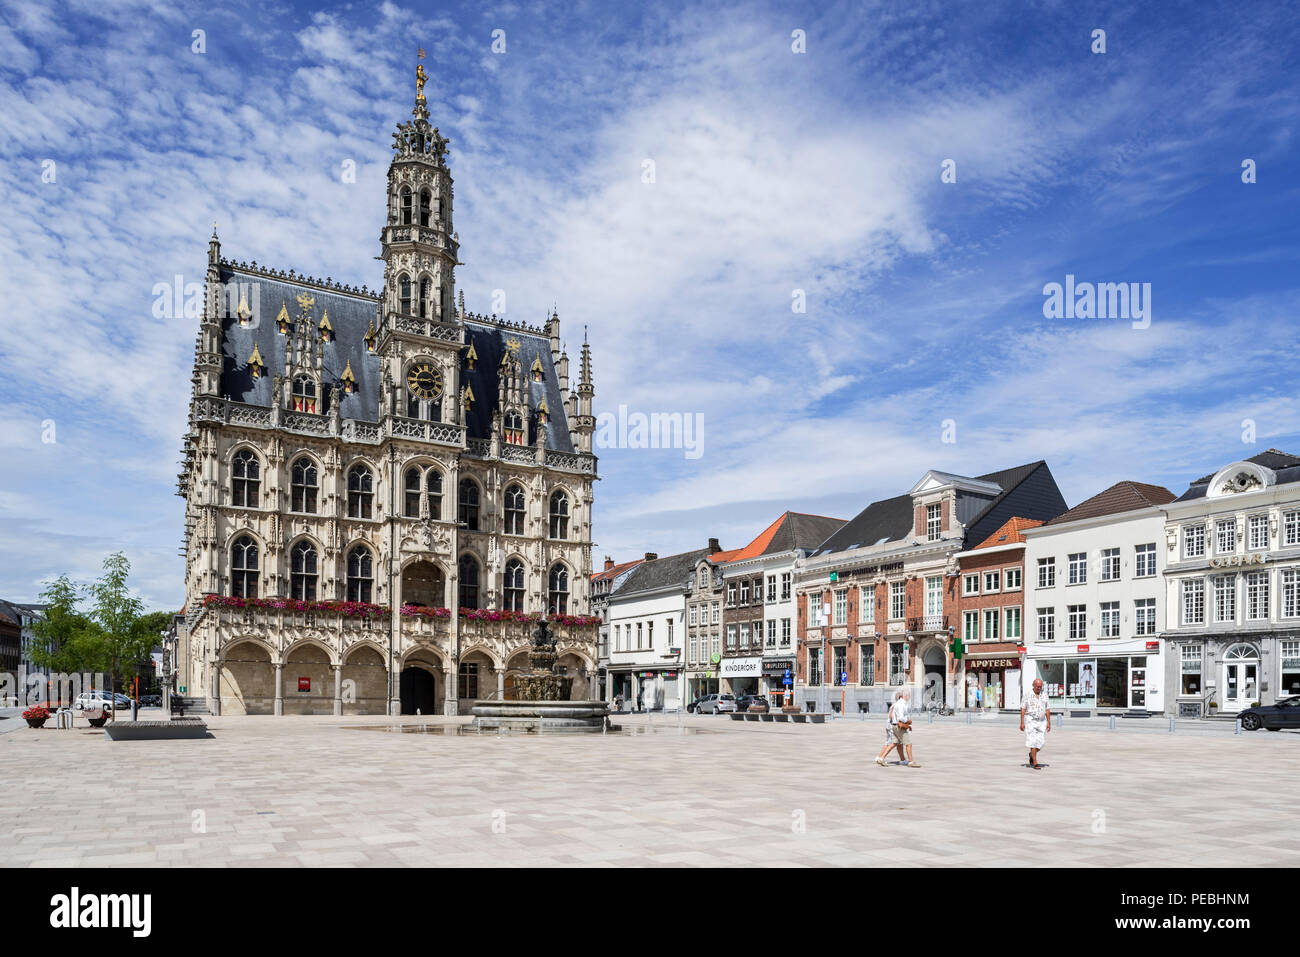 16th century town hall / city hall and belfry of Oudenaarde in Flamboyant Gothic style, East Flanders, Belgium Stock Photo